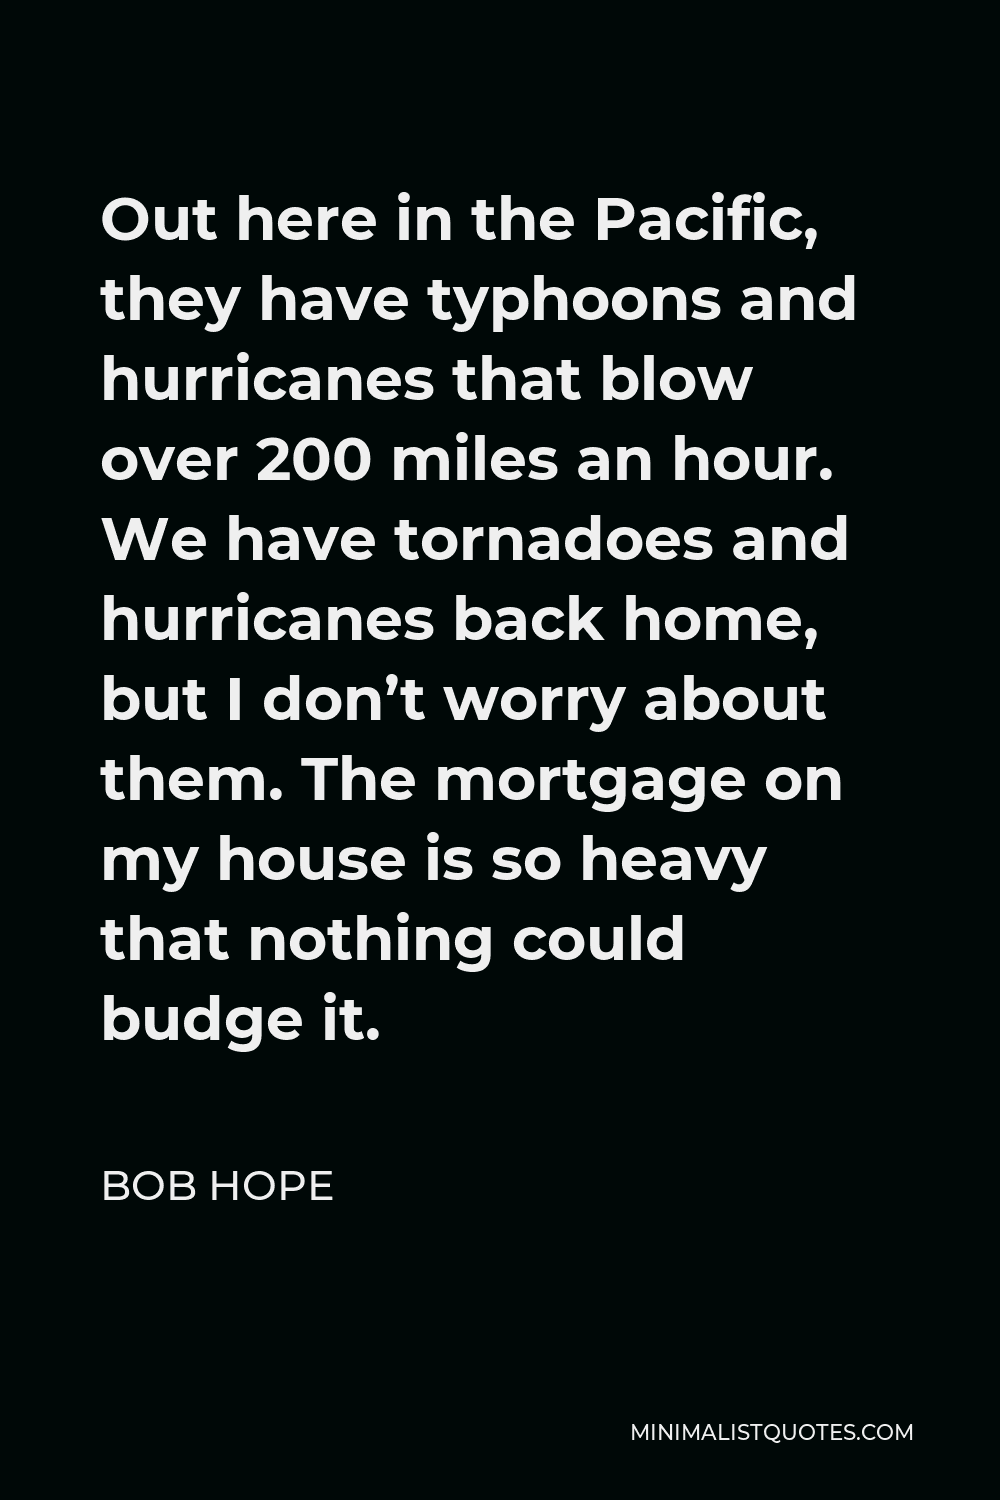 Bob Hope Quote - Out here in the Pacific, they have typhoons and hurricanes that blow over 200 miles an hour. We have tornadoes and hurricanes back home, but I don’t worry about them. The mortgage on my house is so heavy that nothing could budge it.